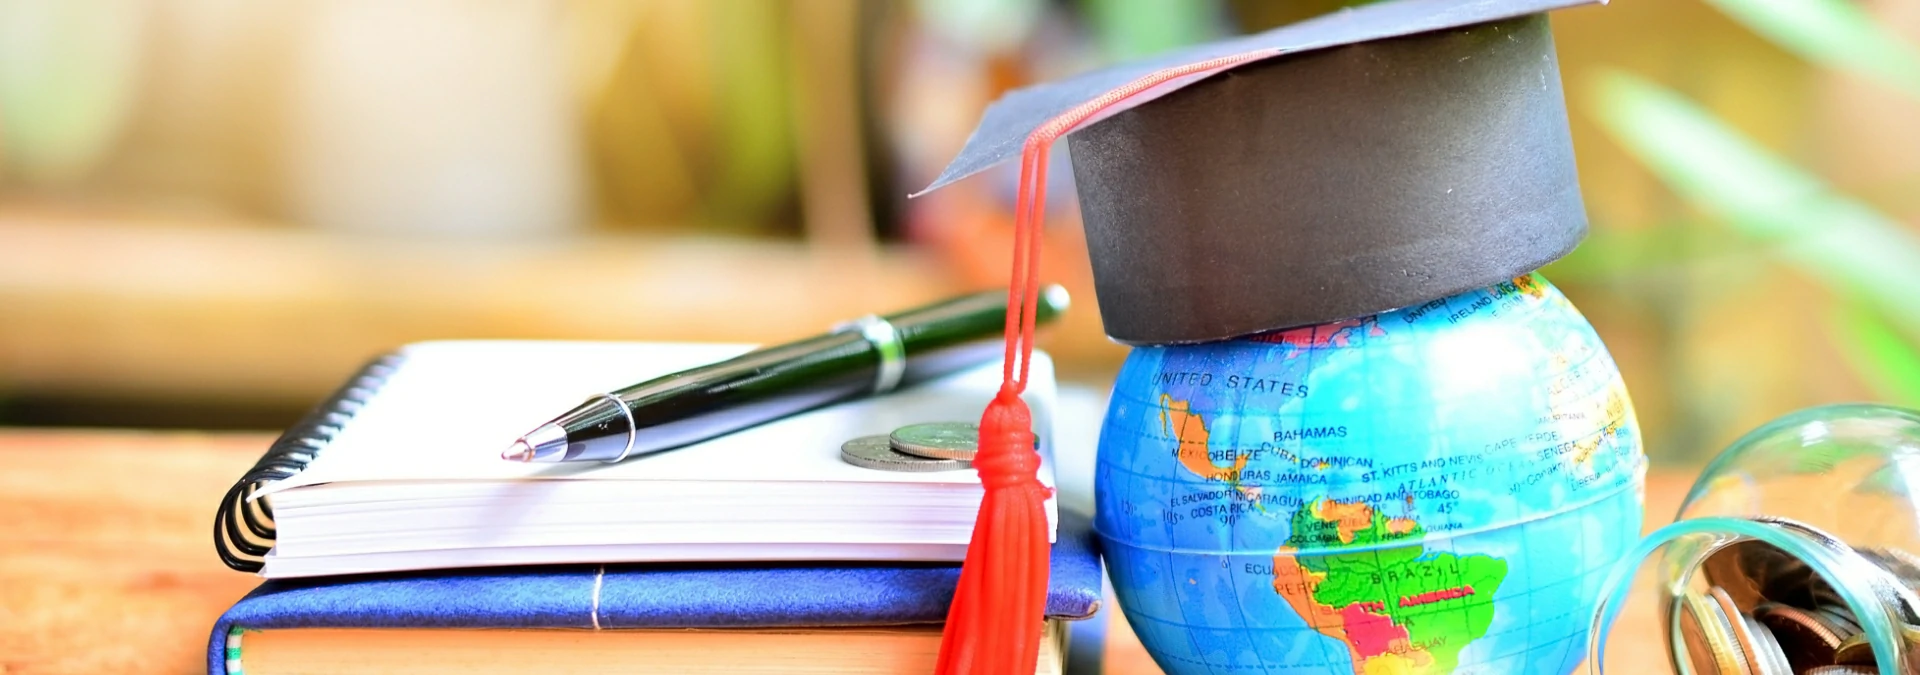 Here's what you can do to begin your study abroad this Summer